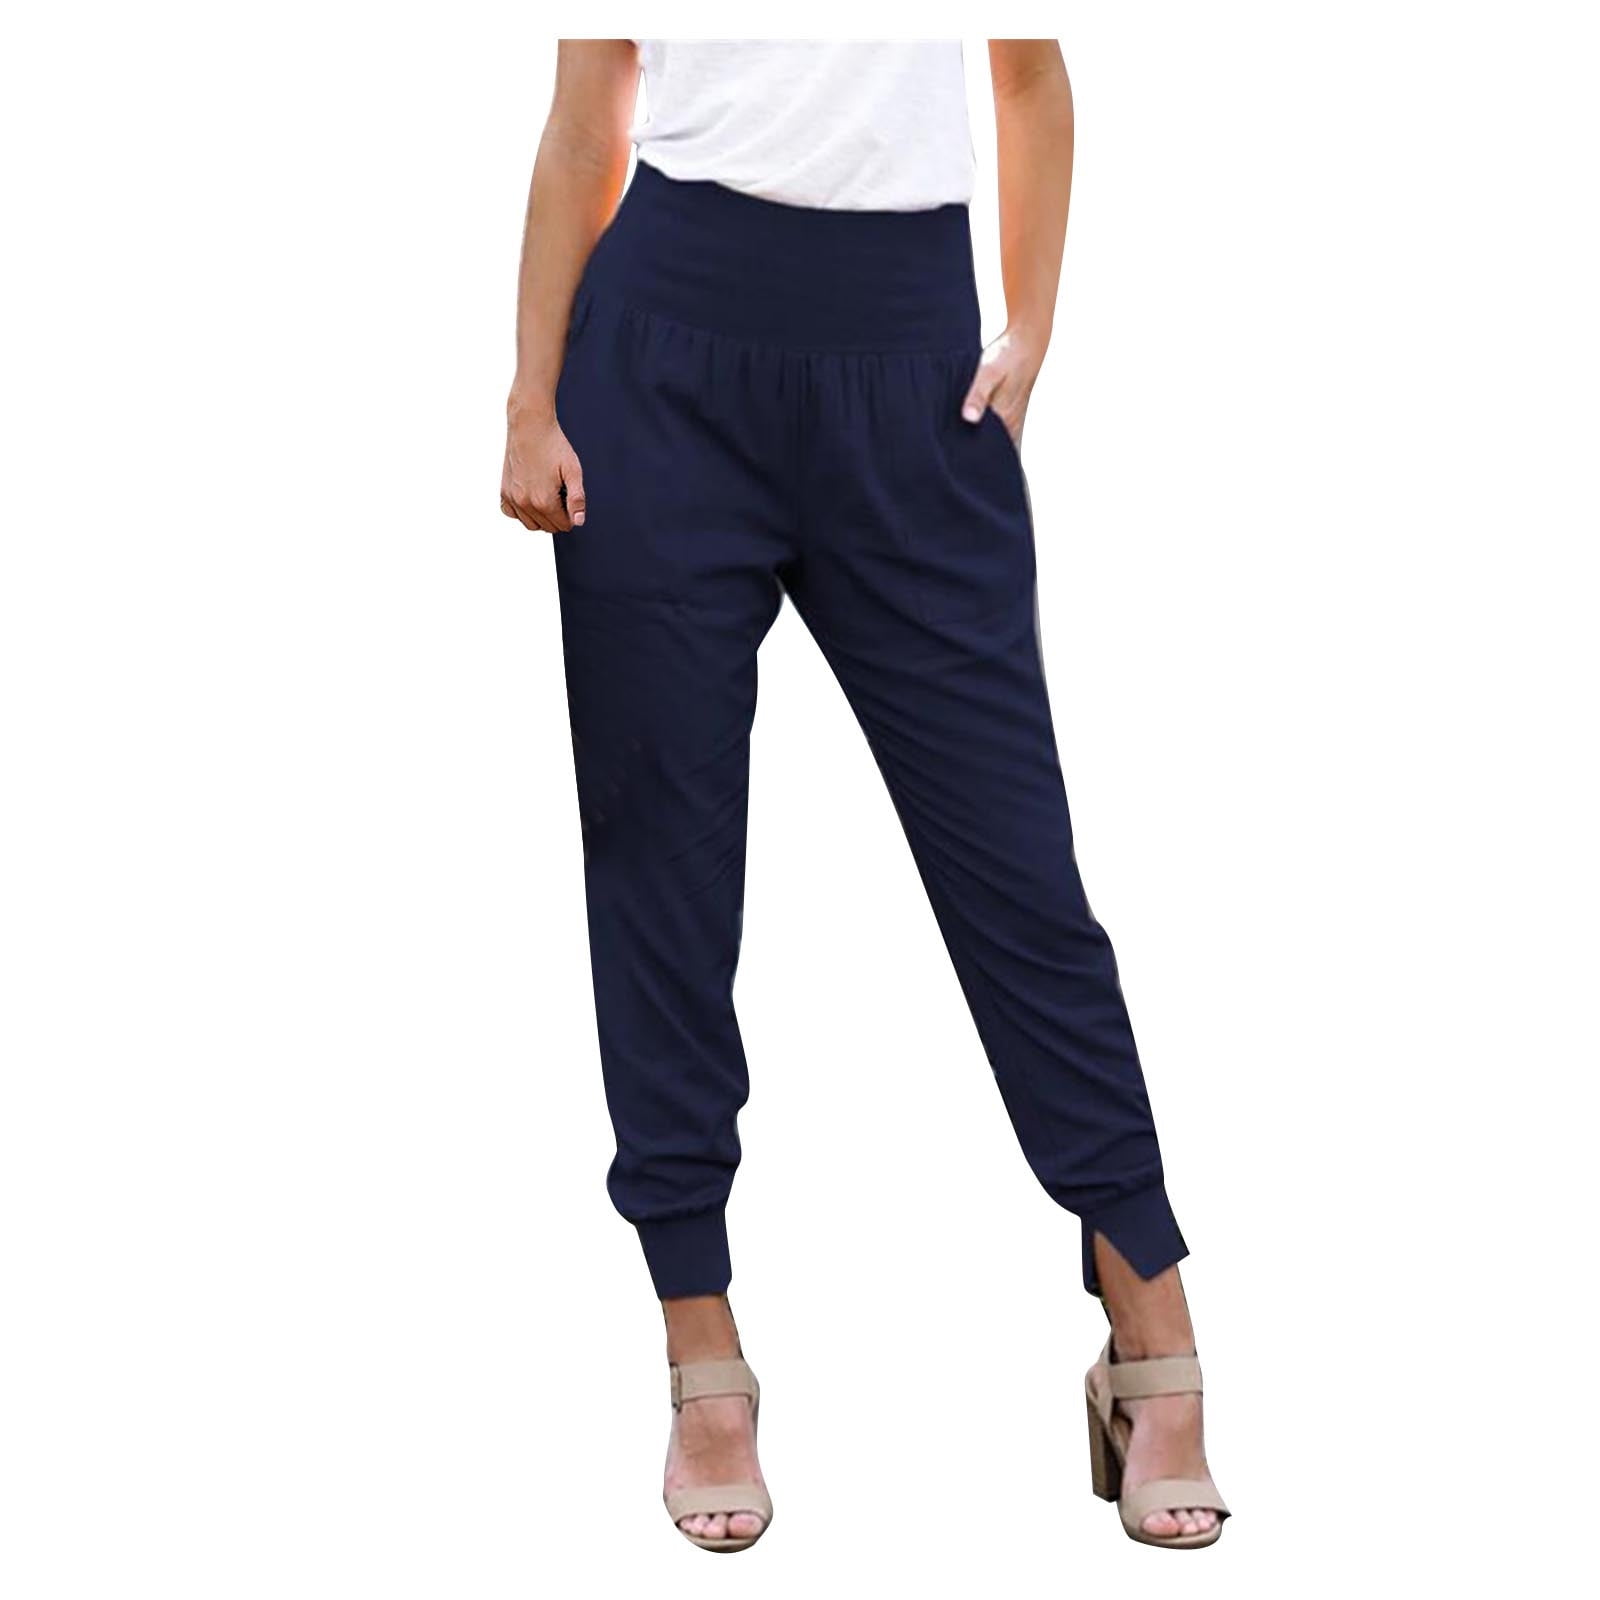 Womens Fashion Fall Deals ! BVnarty Harem Pants for Women Comfy Lounge  Casual High Waist Elastic Pants Solid Color Fashion Fall Winter Long  Trousers